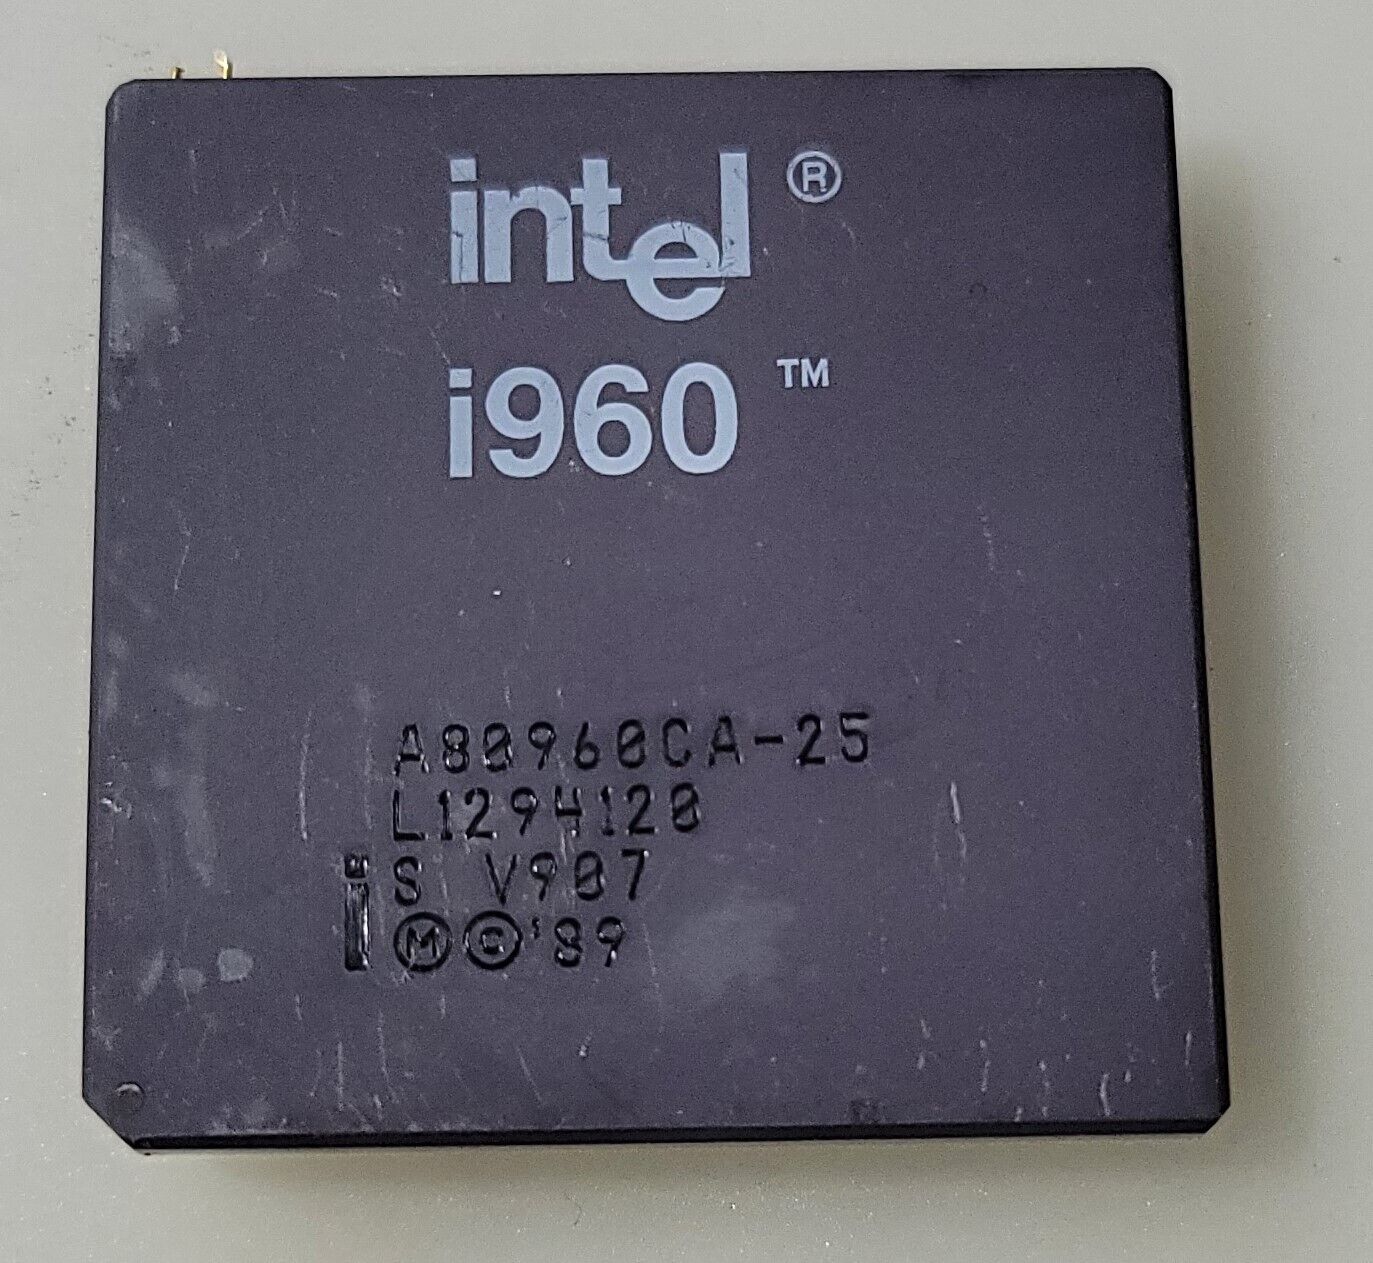 Vintage Rare Intel i960 A80960CA-25 Processor Collection or Gold Recovery